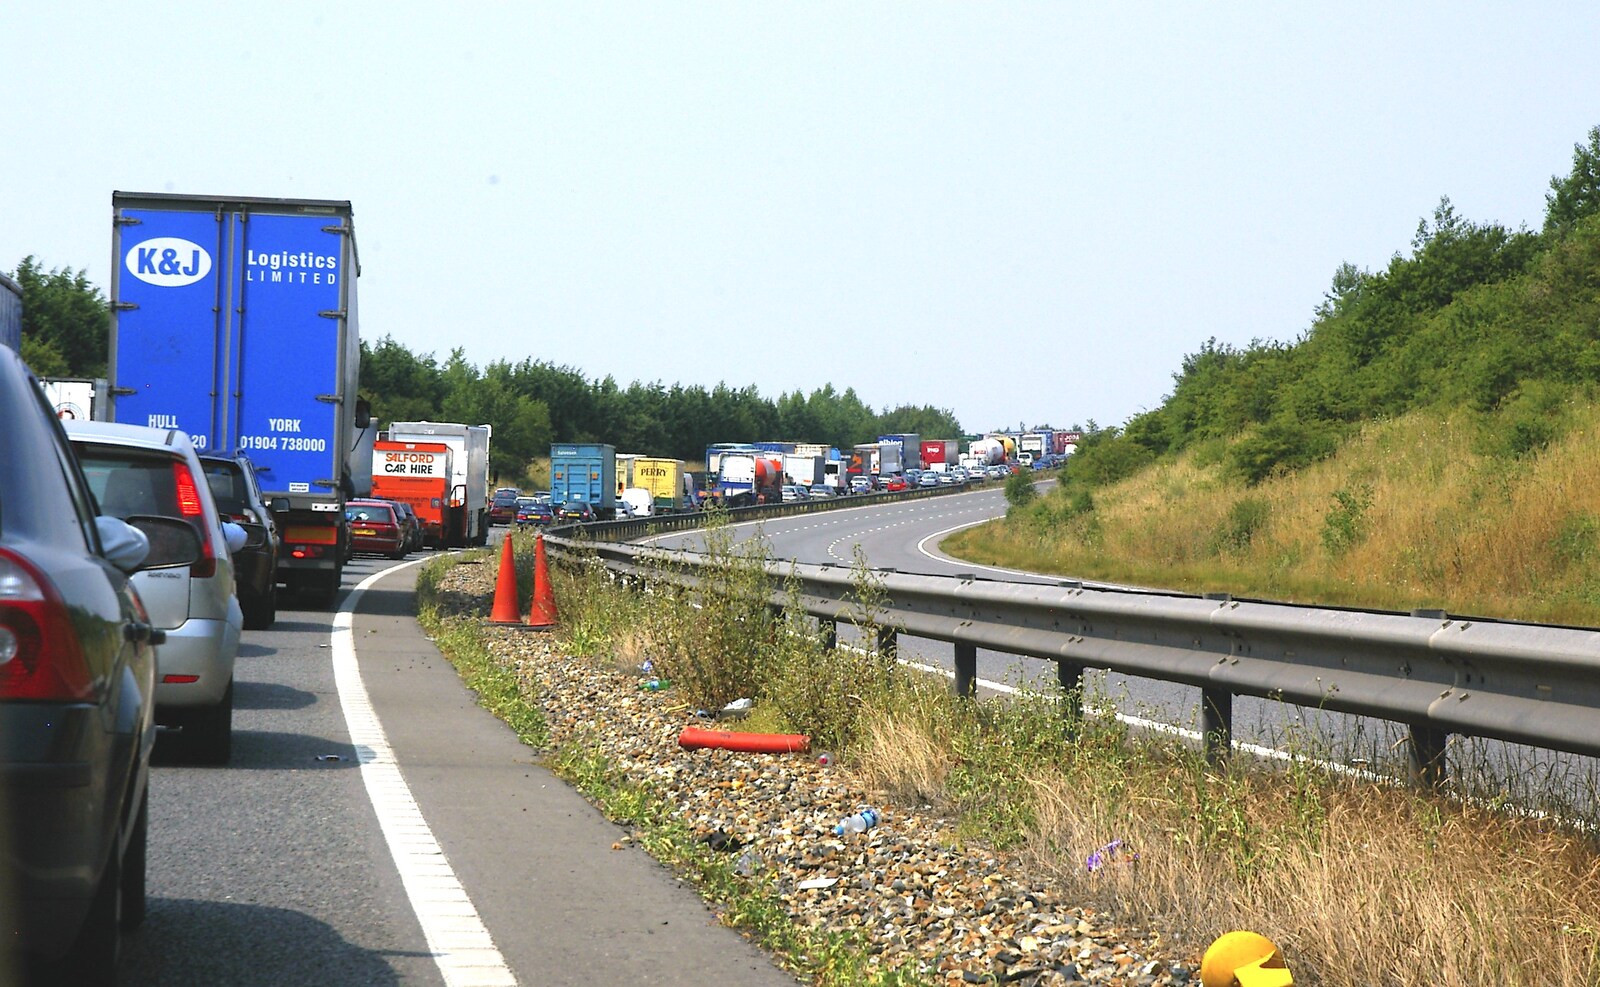 A line of vehicles from Shakespeare at St. John's, Parker's Piece and the A14's Worst Day - 17th July 2006